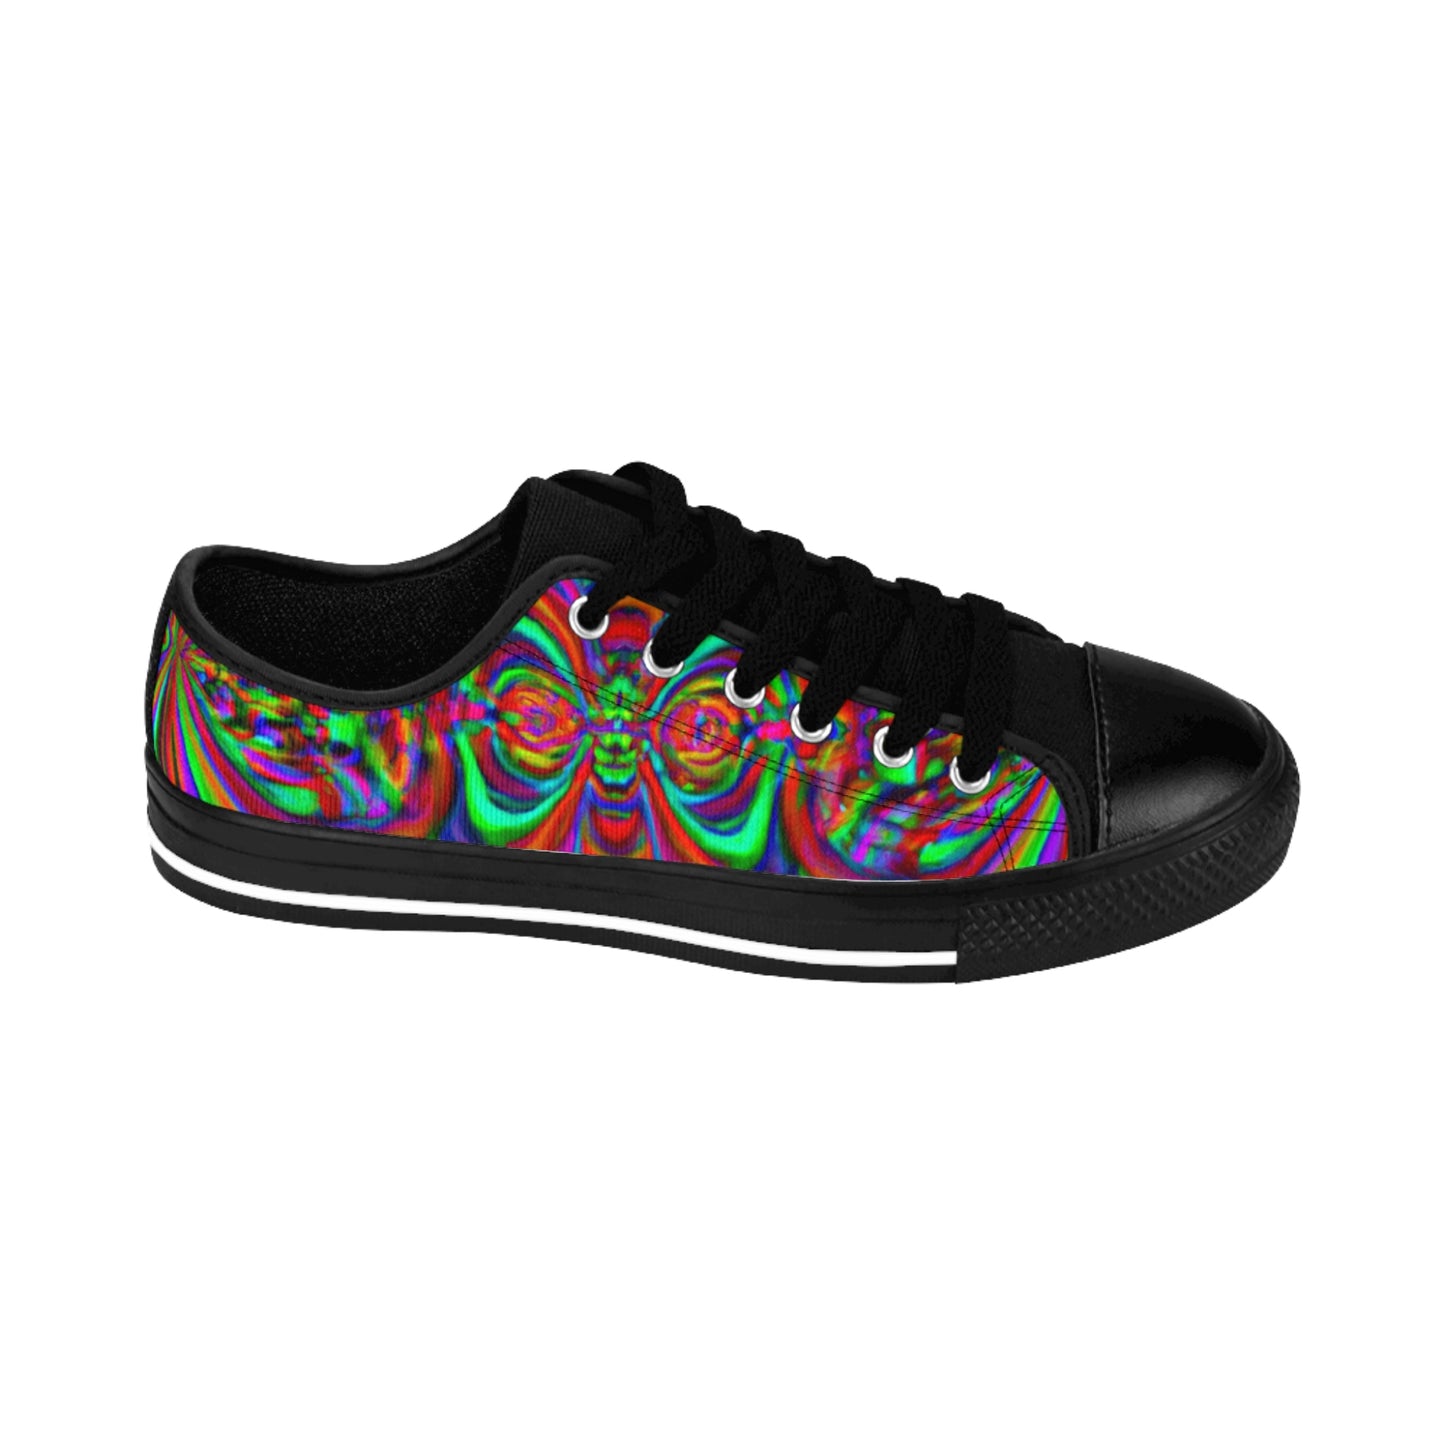 Silena the Shoe-Maker - Psychedelic Low Top